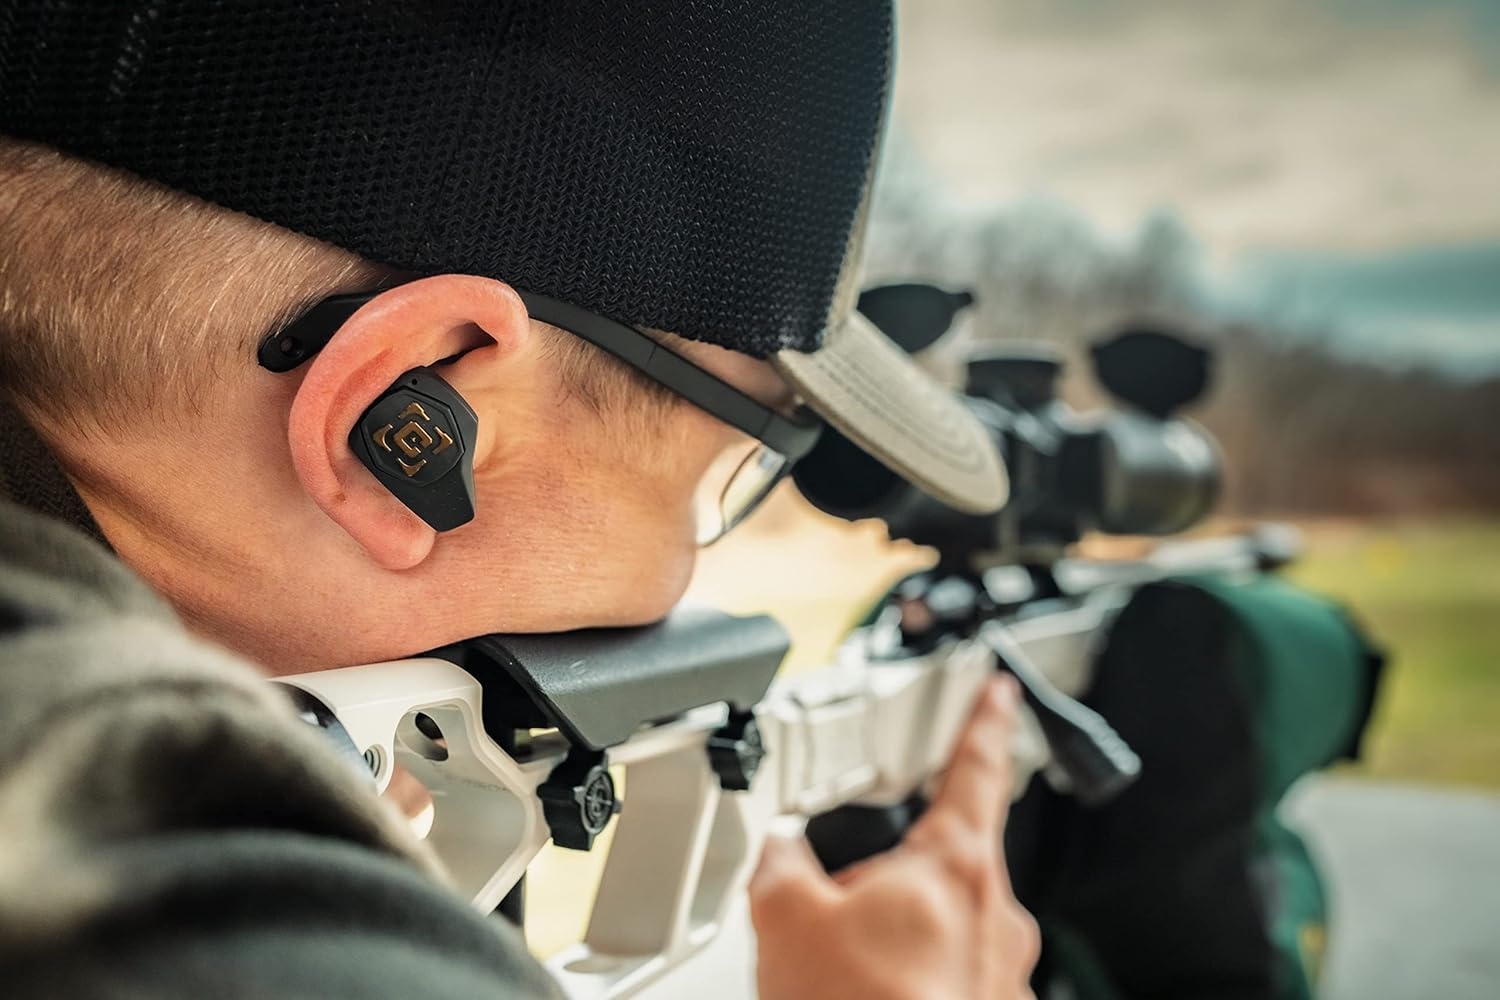 Caldwell Protection auditive active Bluetooth E-MAX Shadows Pro